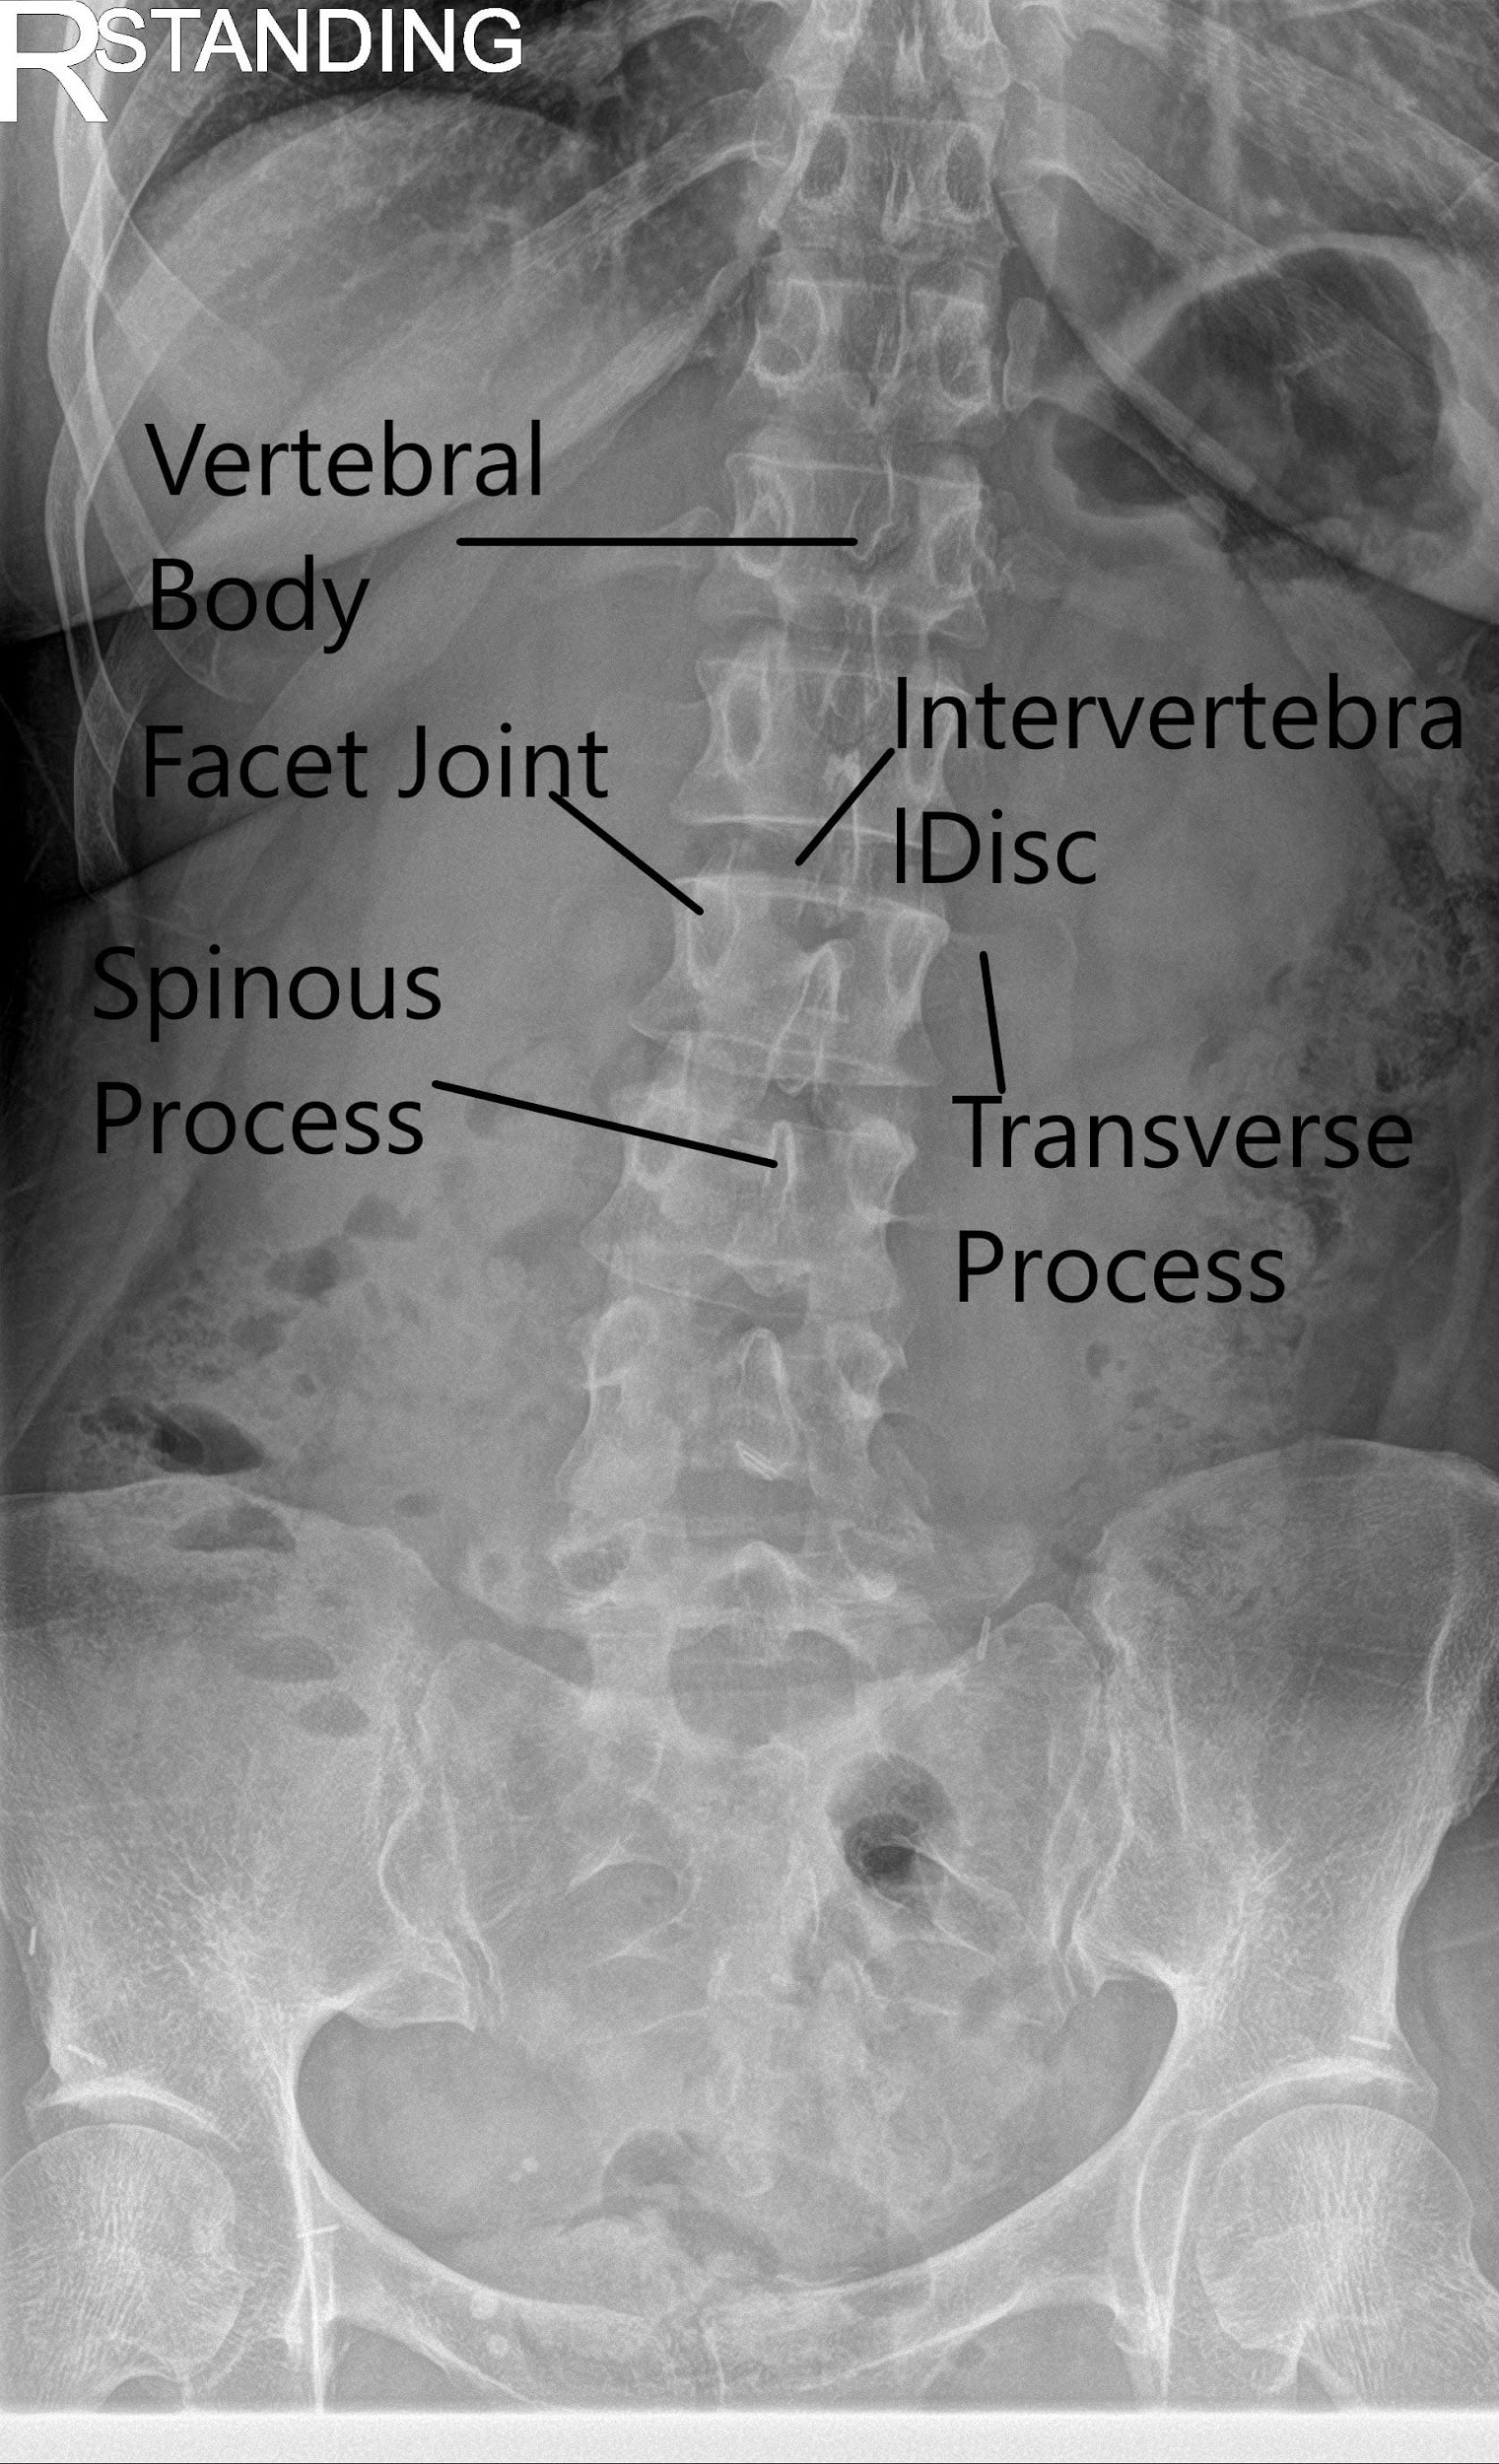 X-ray of the LS spine in AP and Lateral views showing degenerative changes 